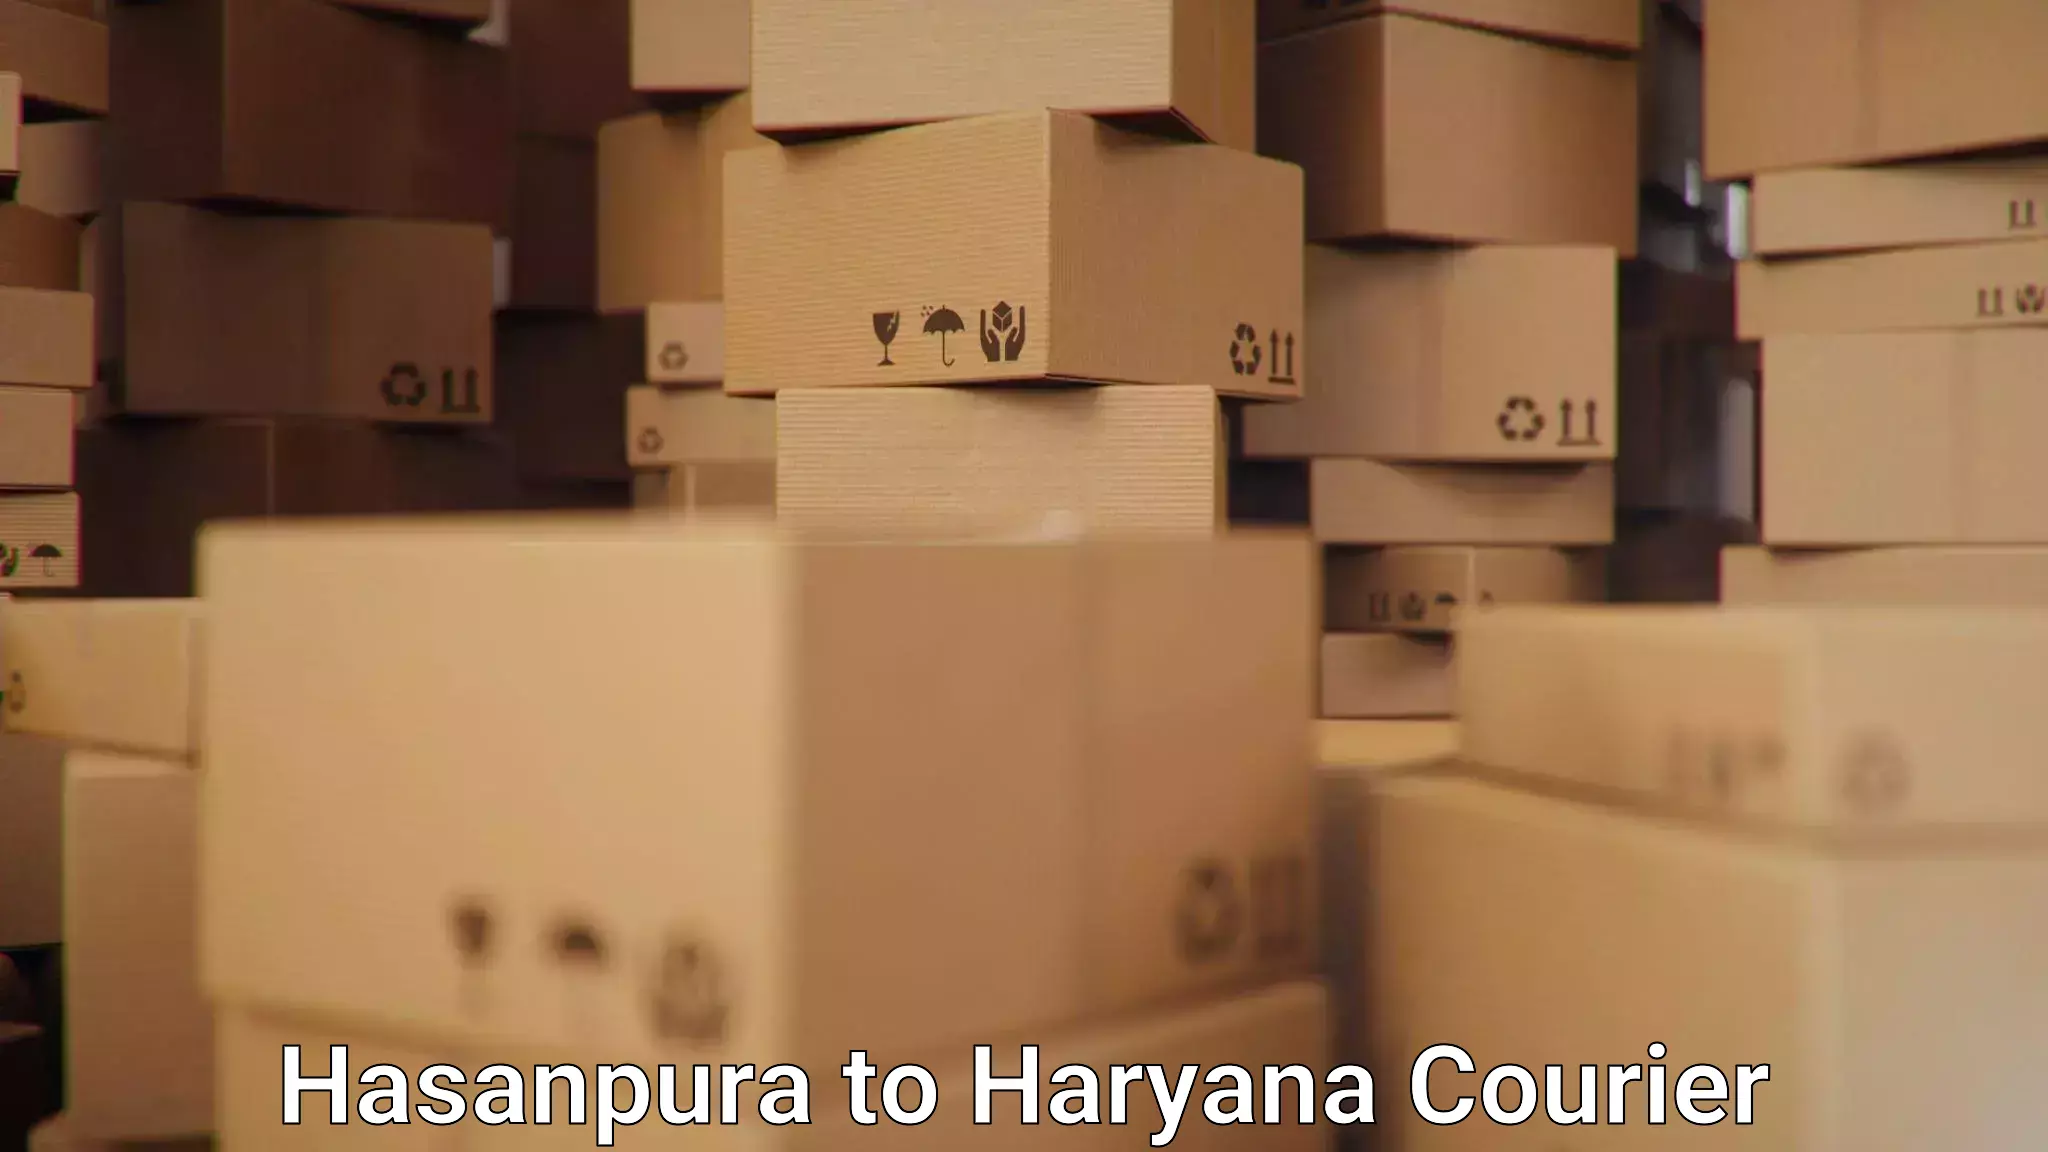 Local delivery service Hasanpura to Haryana